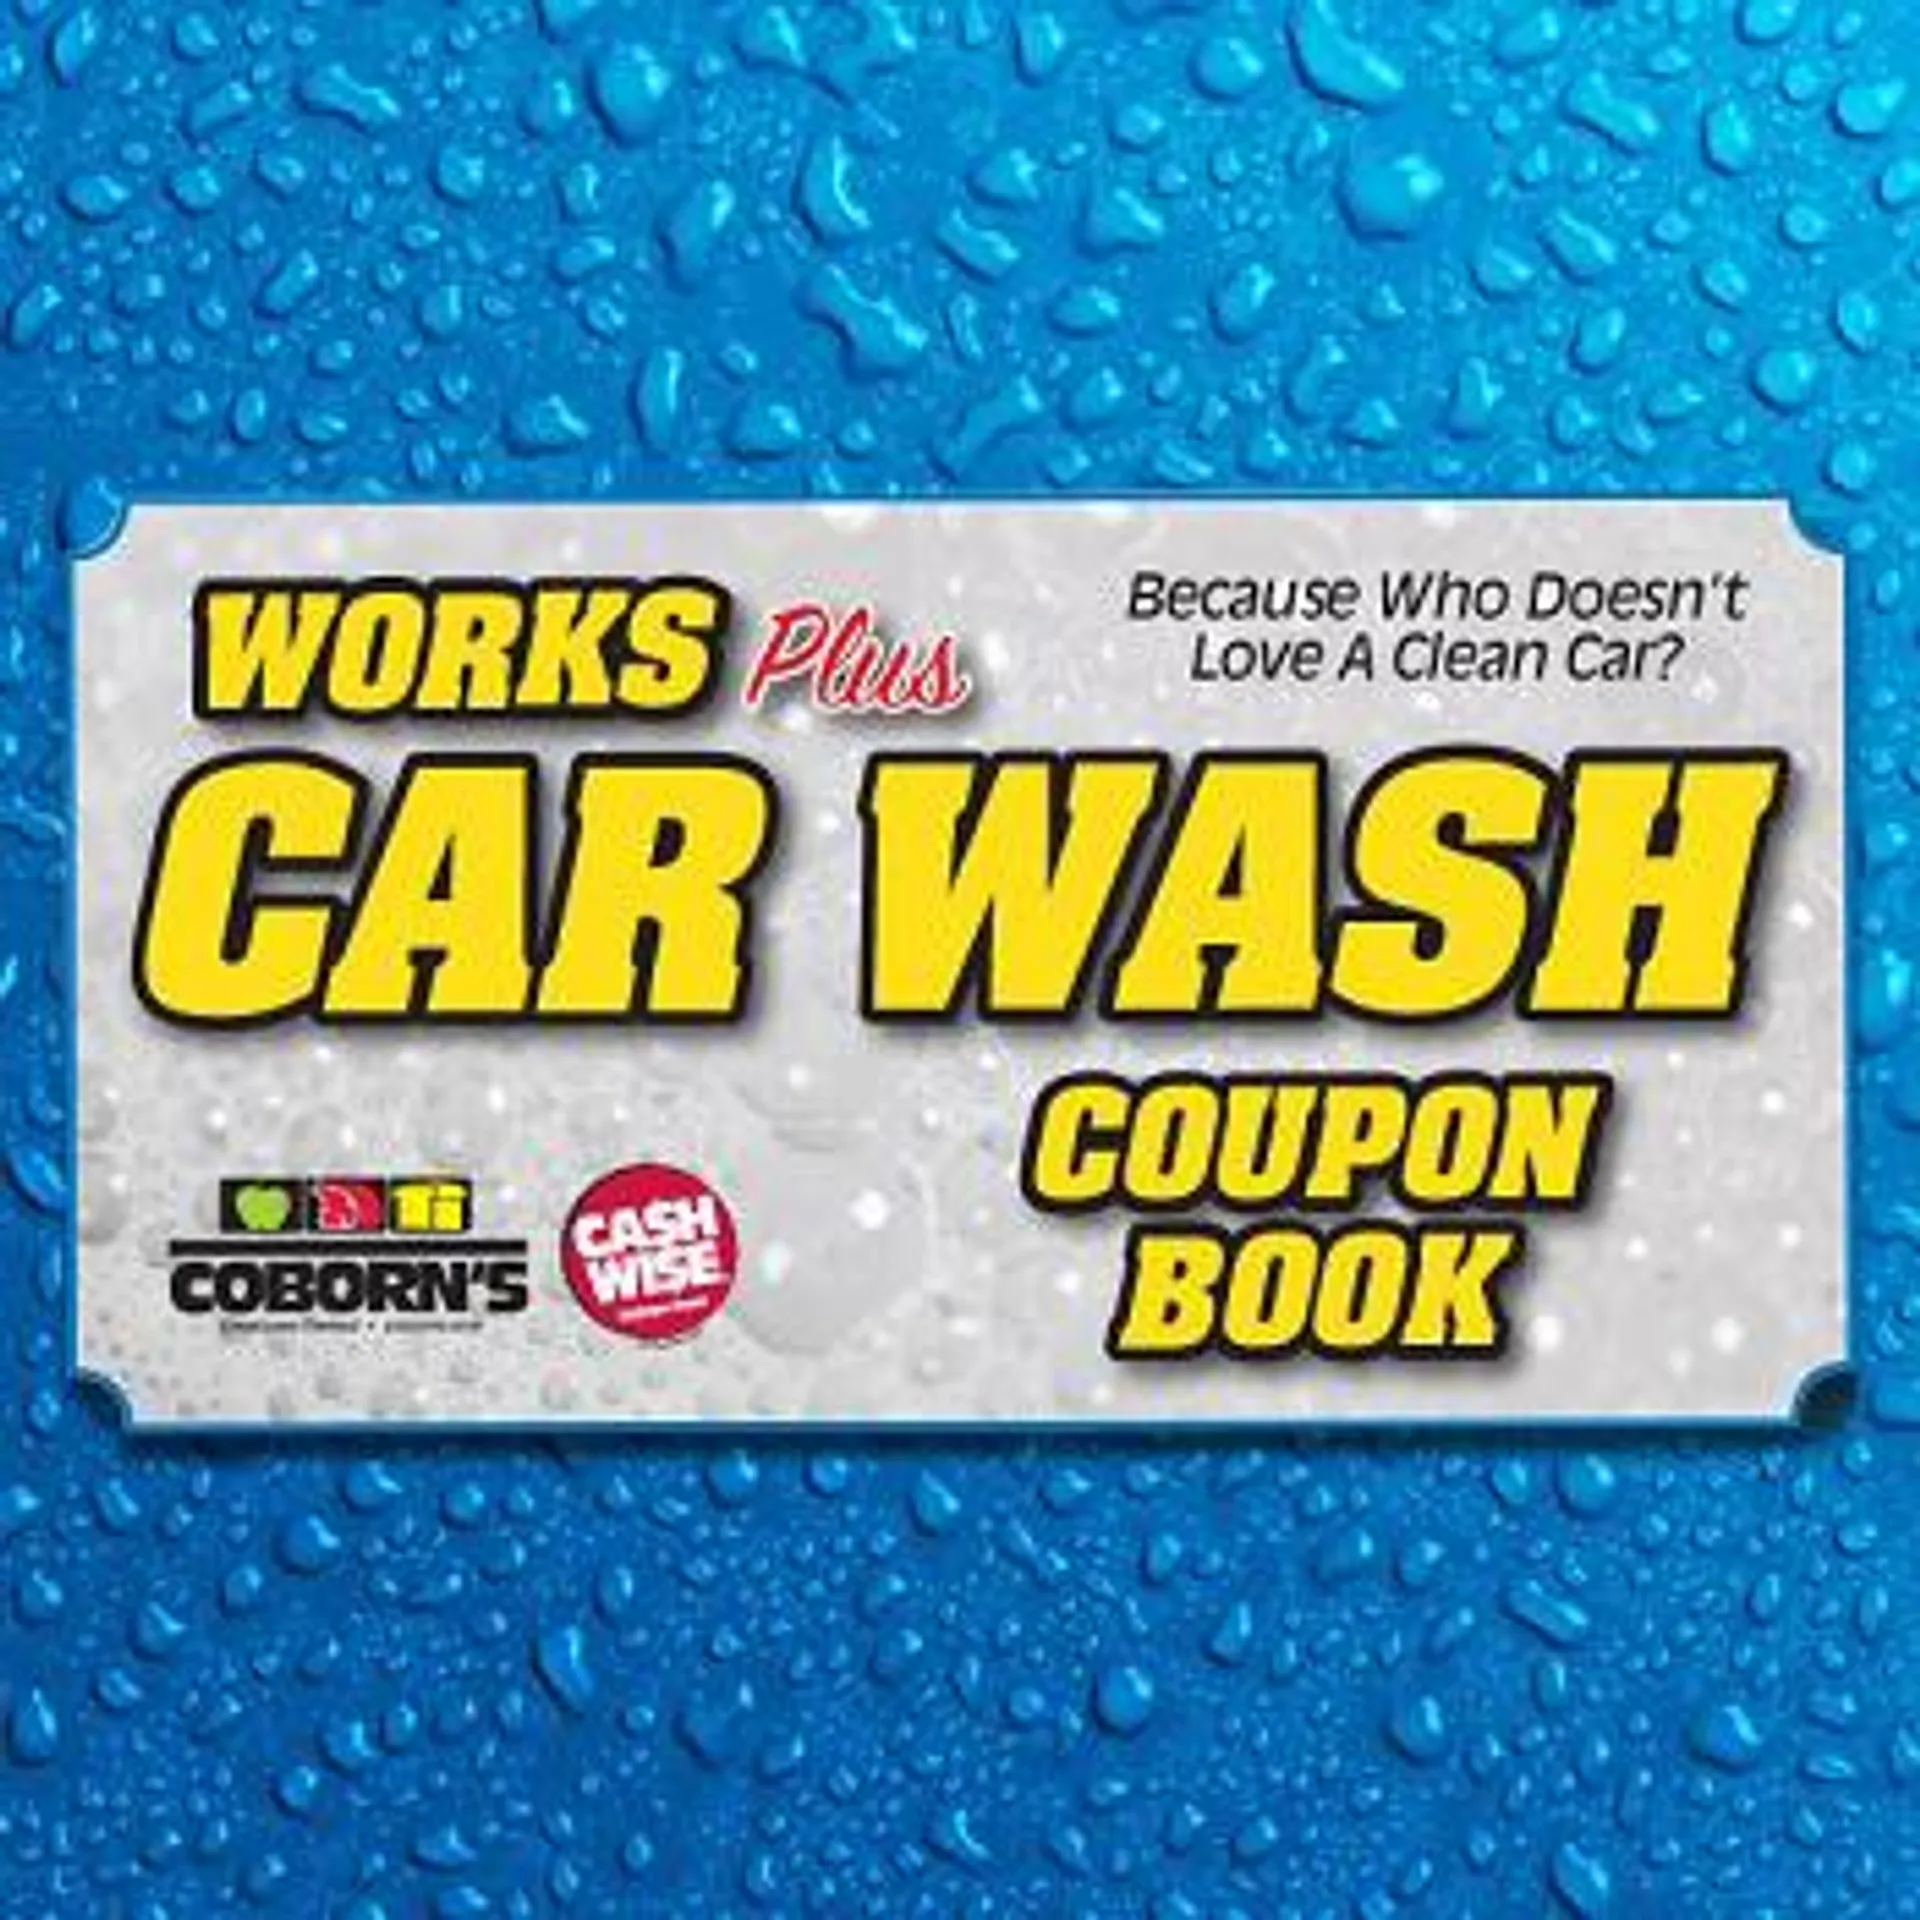 The Works Plus Car Wash Coupon Book - 4 Ct.